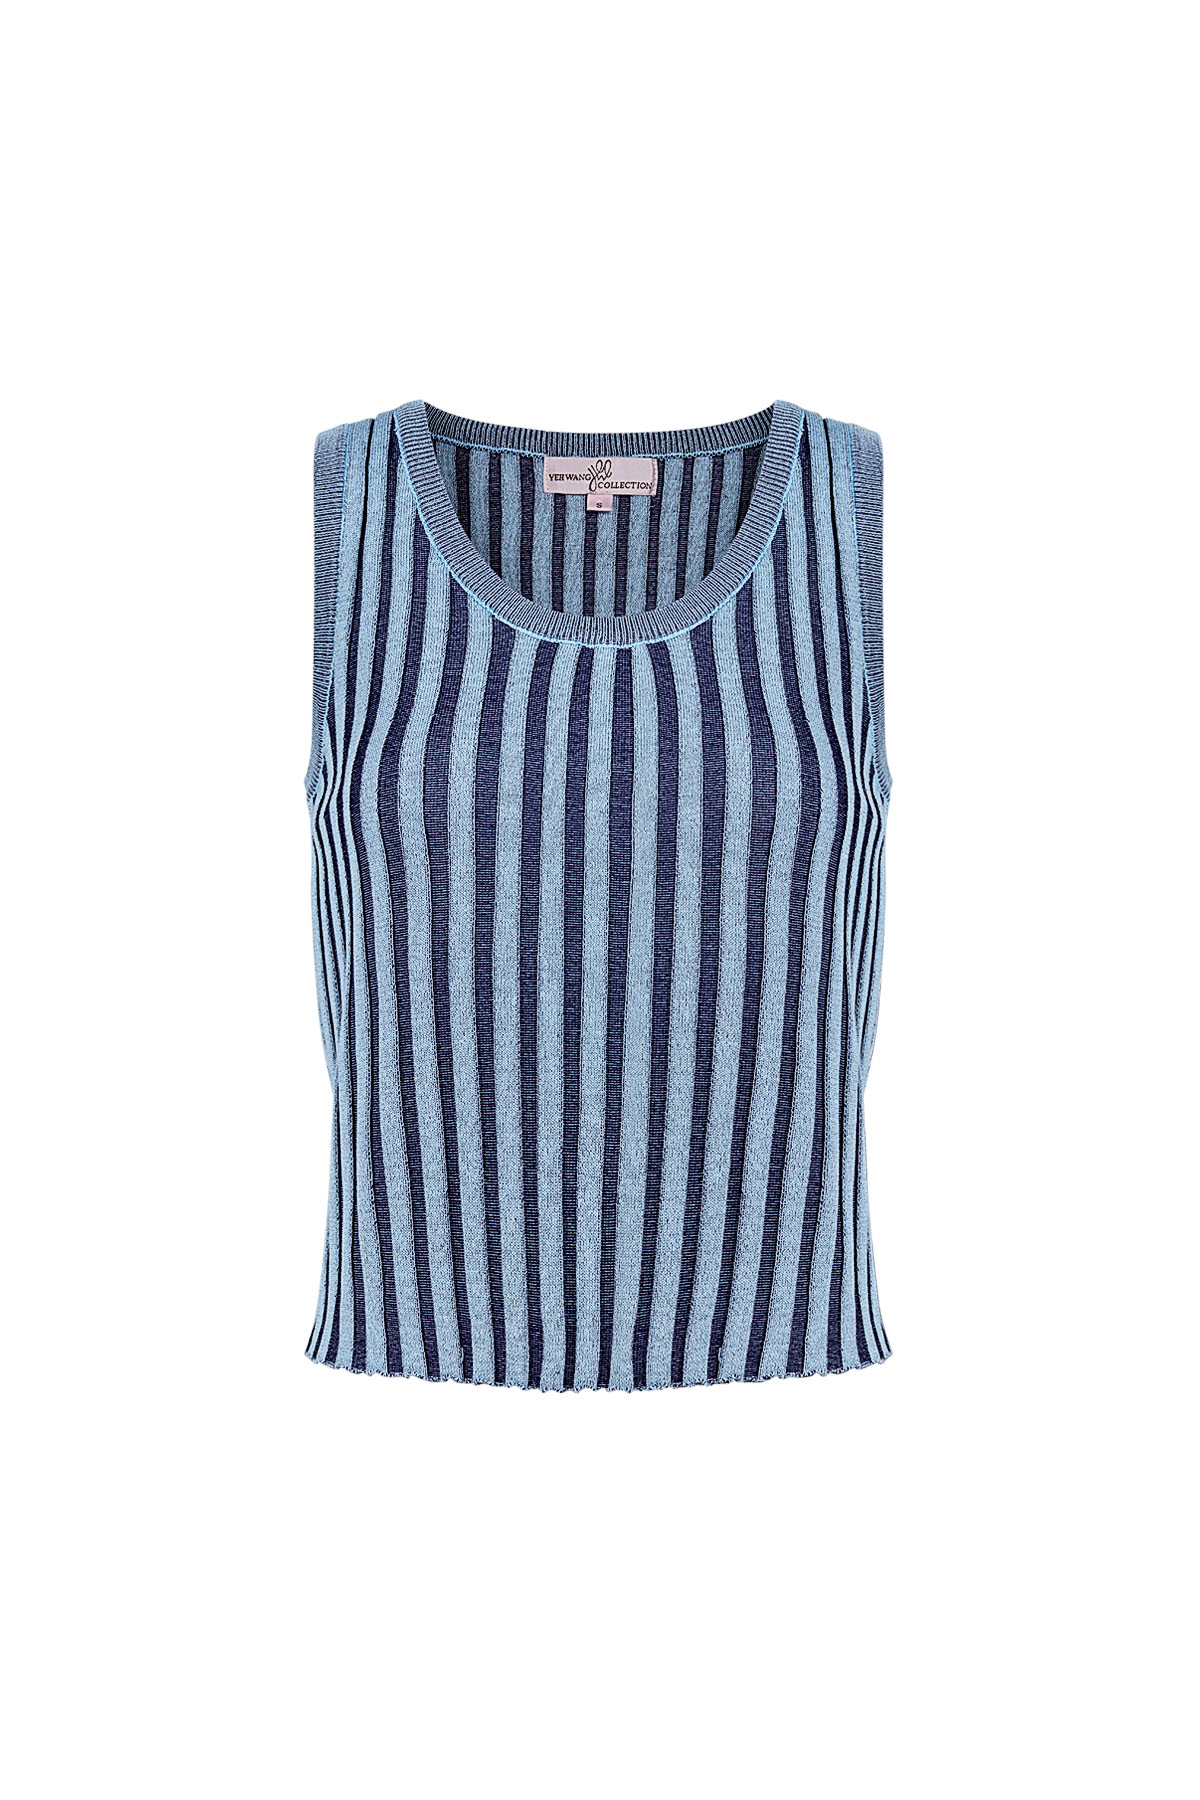 Sleeveless, striped top small – blue h5 